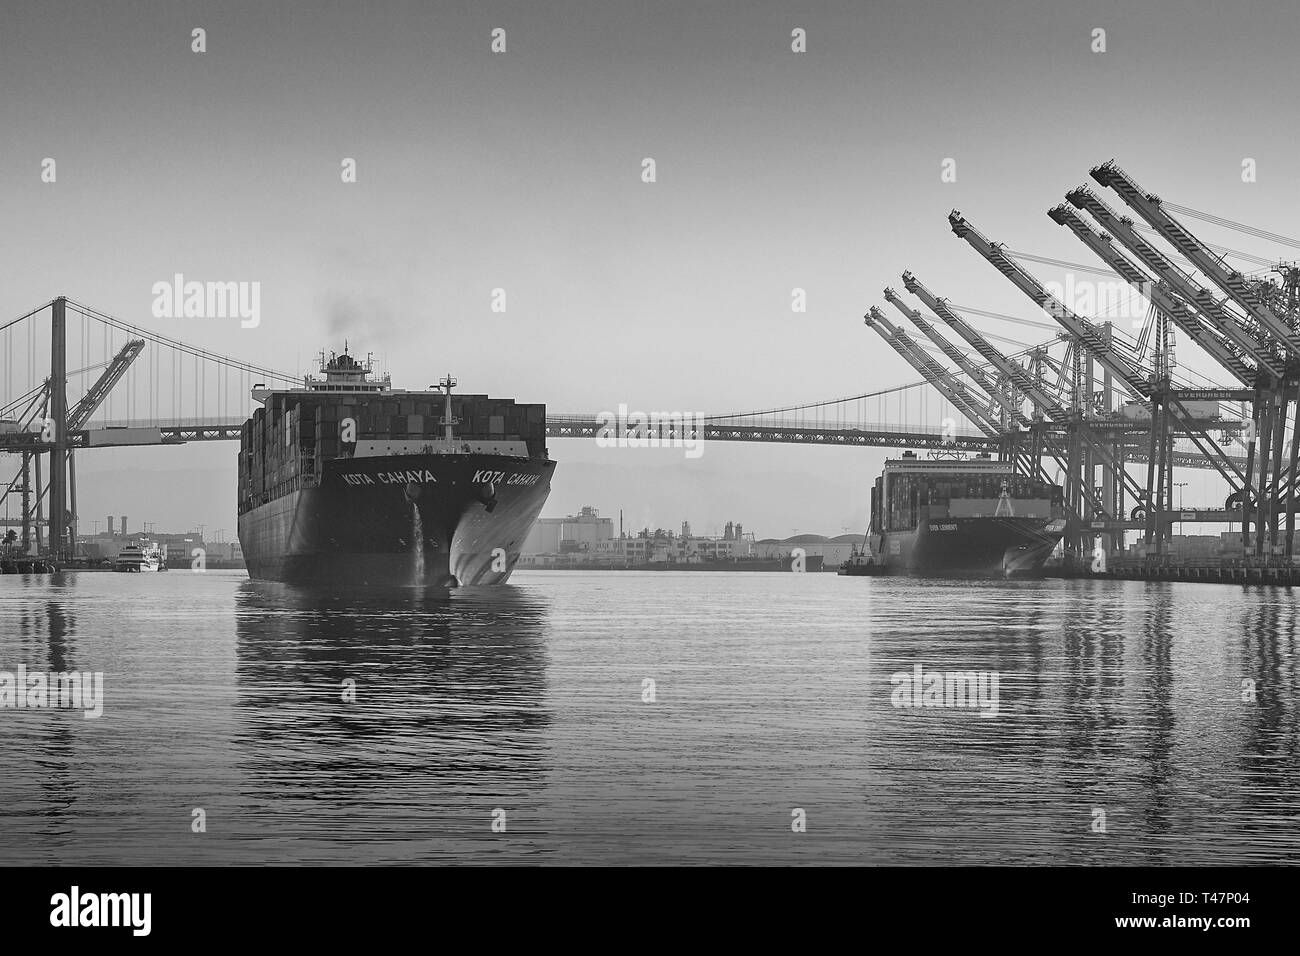 Black And White Photo Of The Container Ship, KOTA CAHAYA, Pumping Ballast Water Overboard (De-Ballasting), As She Departs The Port Of Los Angeles, USA Stock Photo